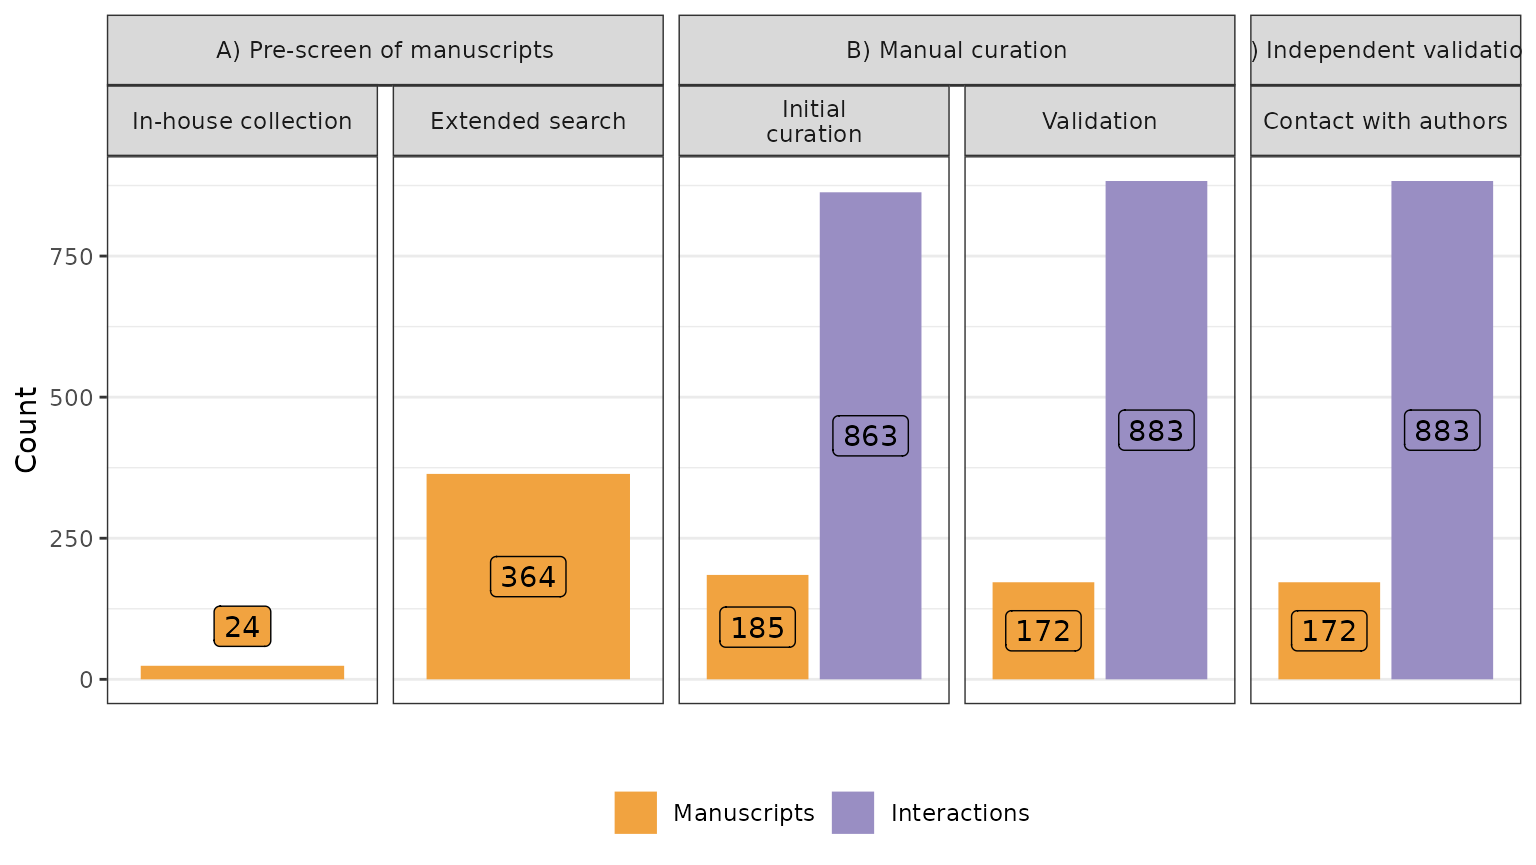 Number of manuscripts, proteins and interactions during the different stages of data curation.